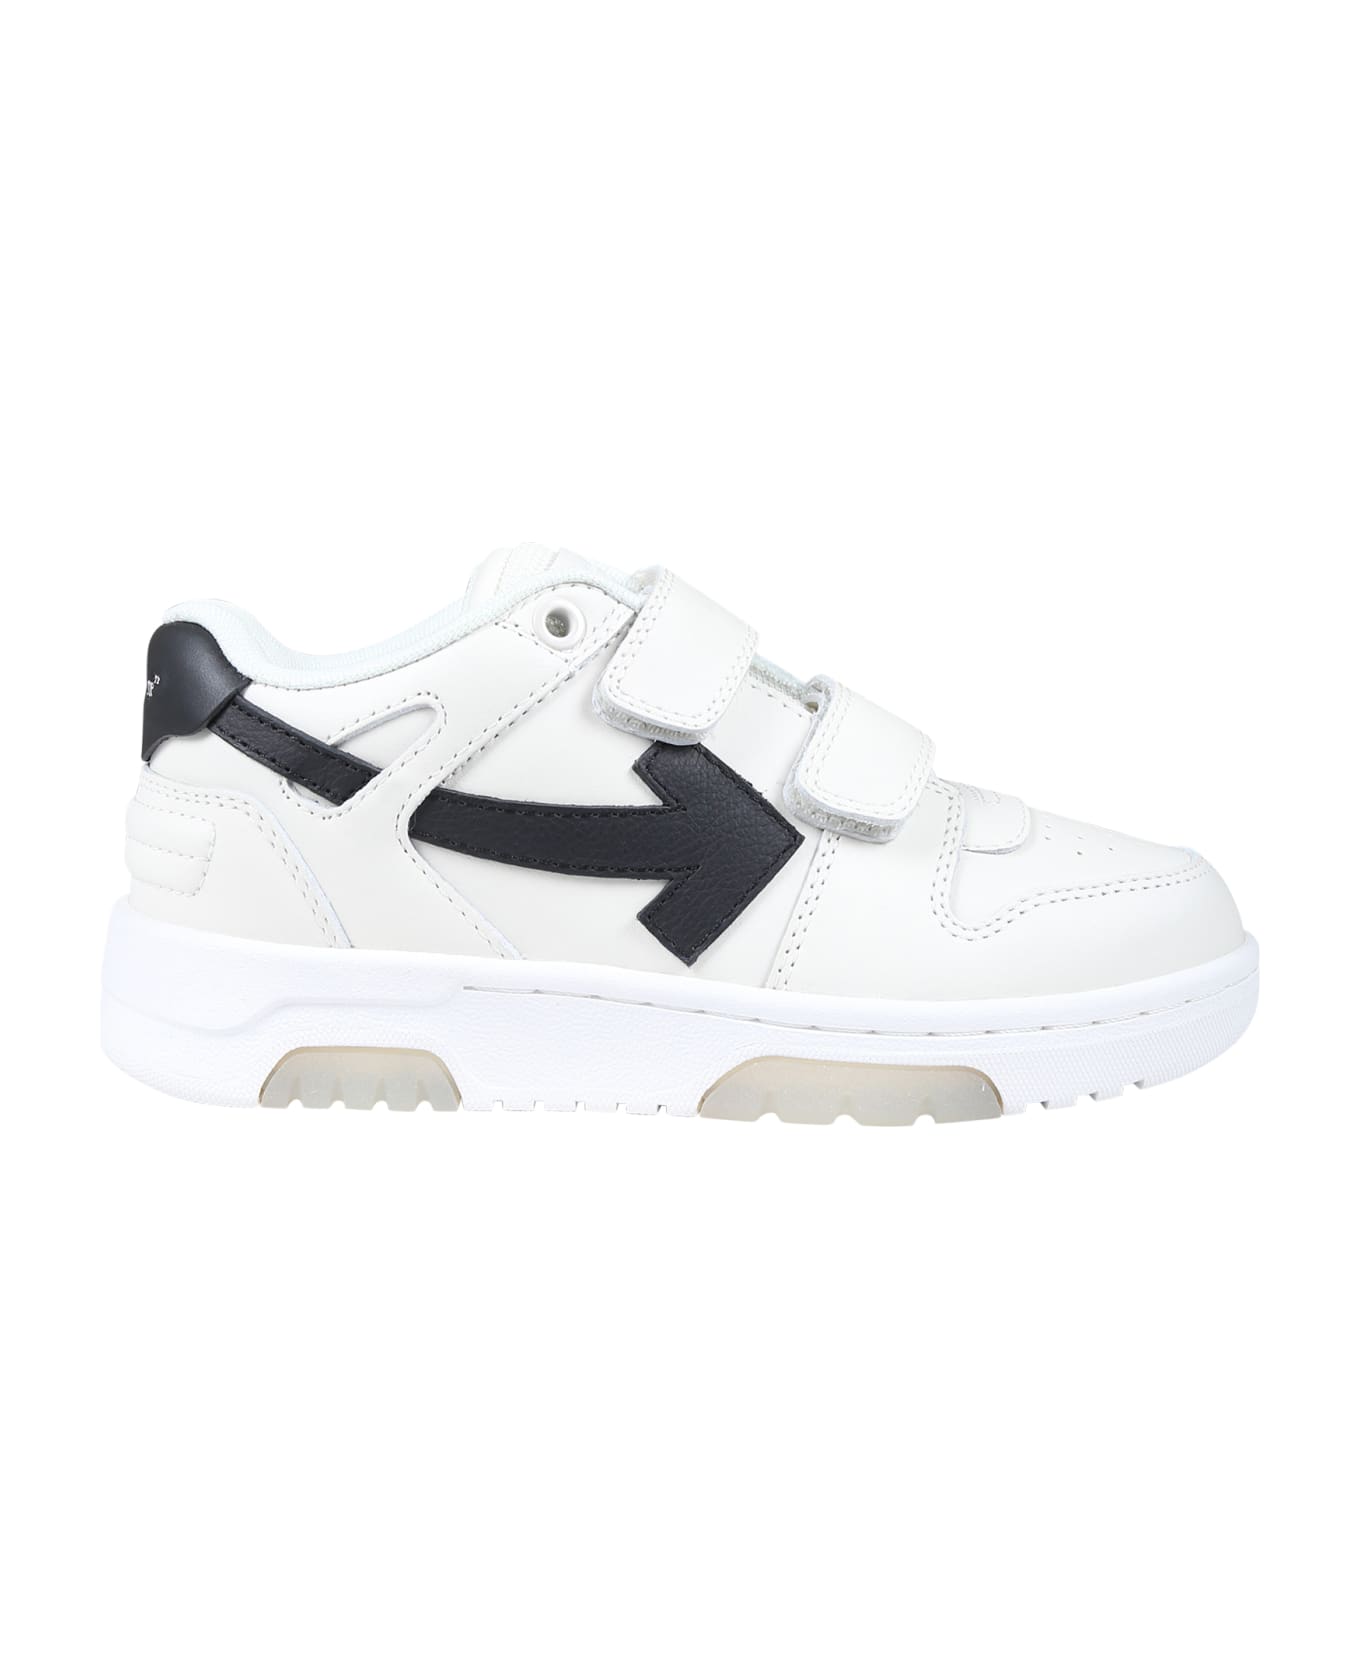 Off-White White Sneakers For Boy With Arrows - WHITE/BLACK